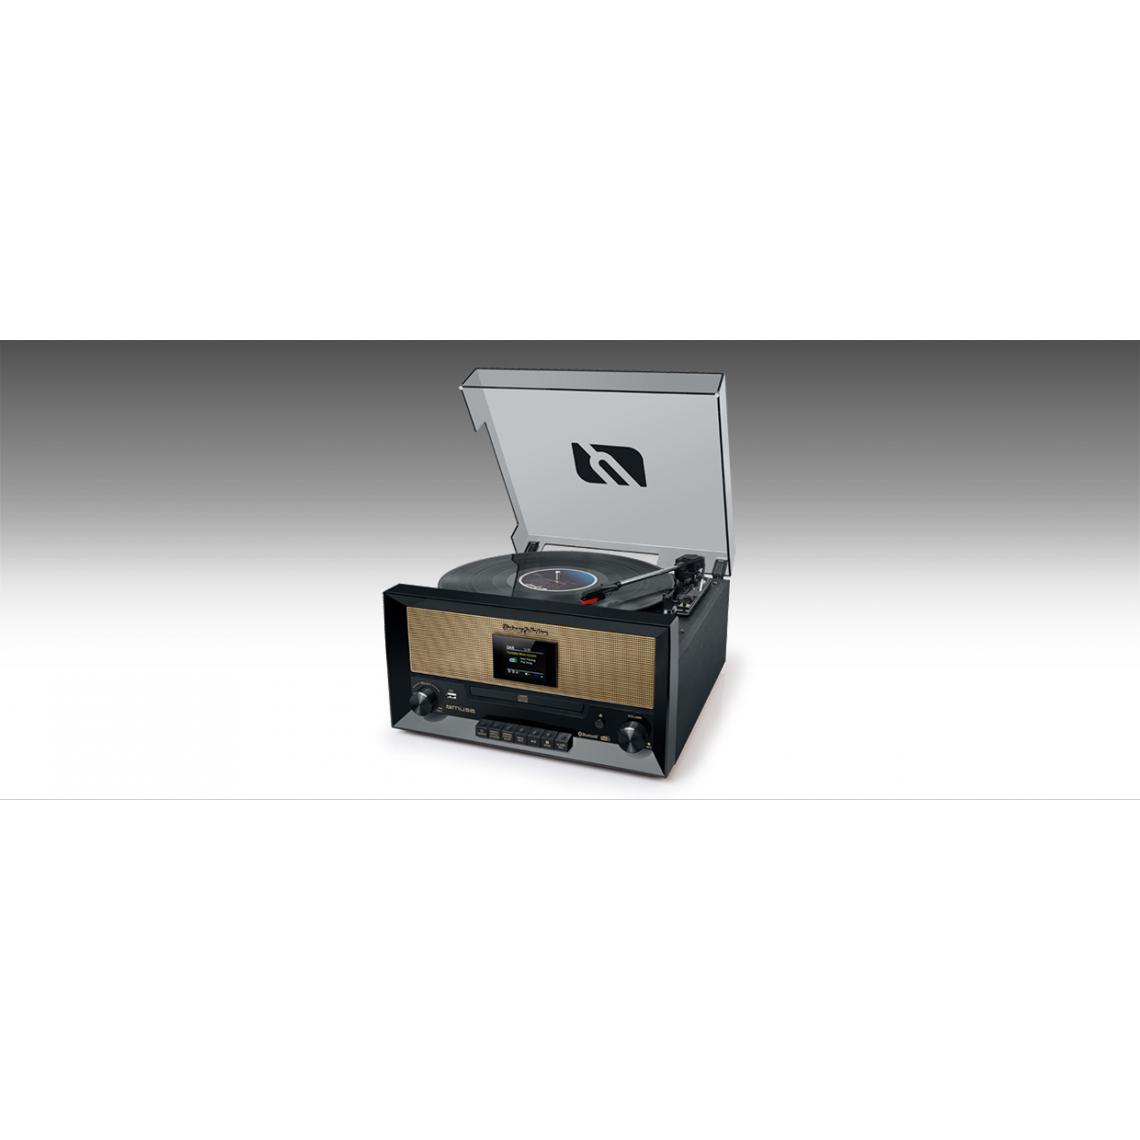 Muse - Muse dab+ micro systeme cd MT-110 - Platine